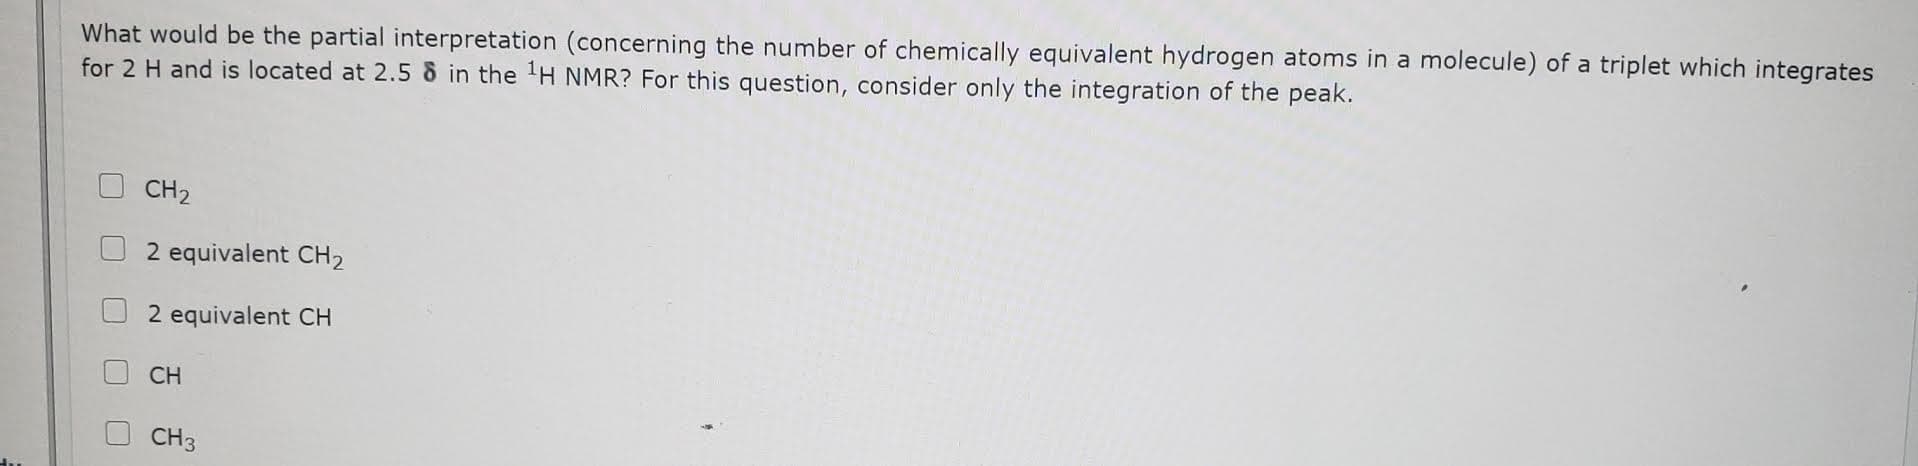 What would be the partial interpretation (concerning the number of chemically equivalent hydrogen atoms in a molecule) of a triplet which integrates
for 2 H and is located at 2.5 8 in the
NMR? For this question, consider only the integration of the peak.
CH2
2 equivalent CH2
2 equivalent CH
CH
CH3
